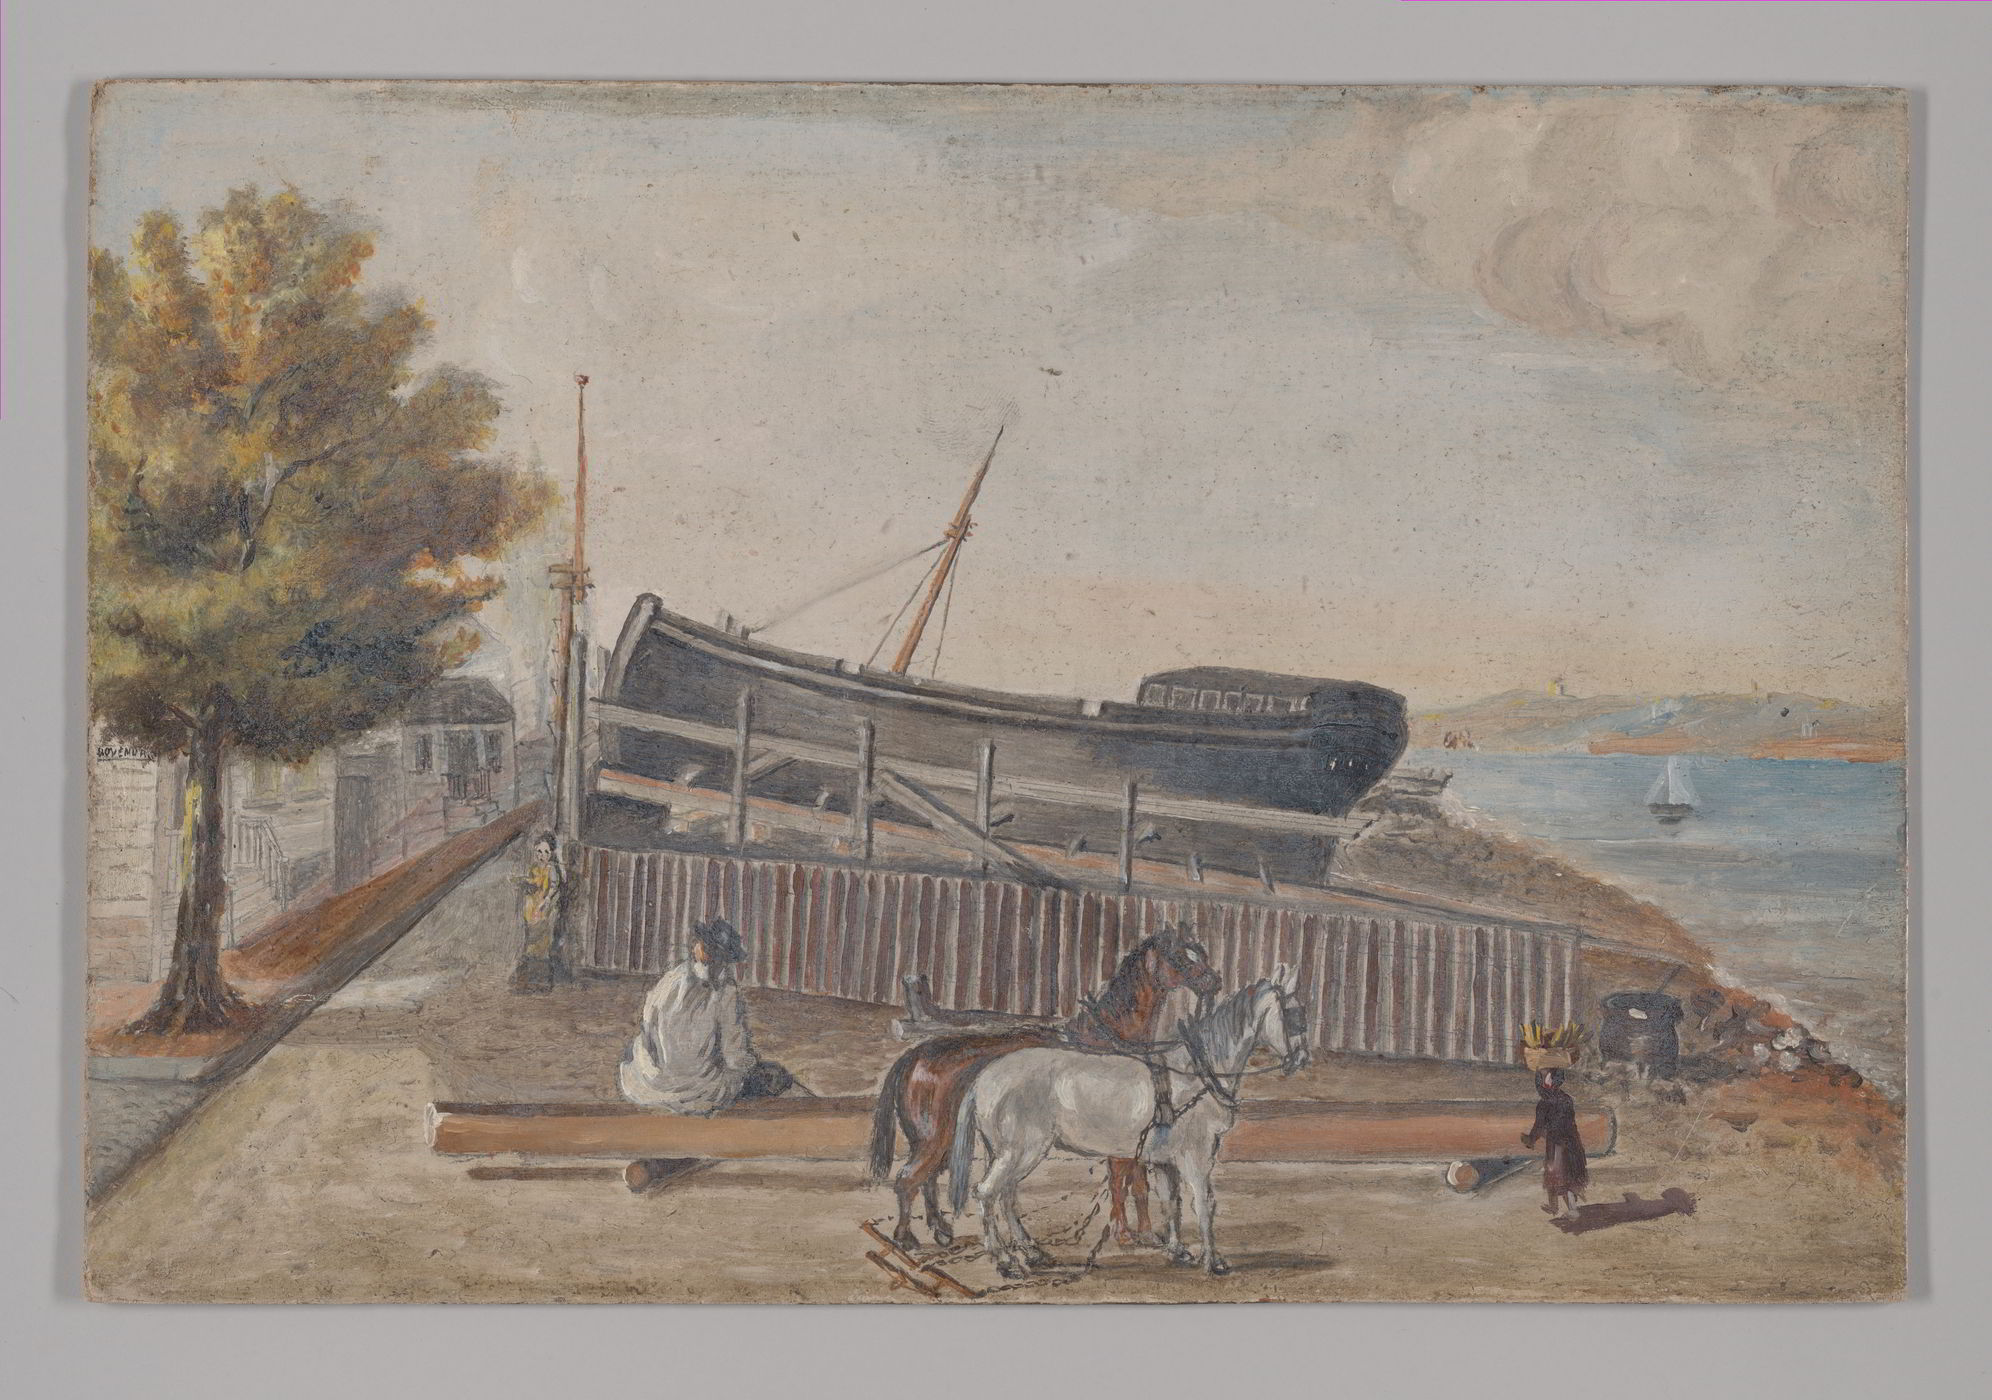 Berg's Ship Yard by William P. Chappel